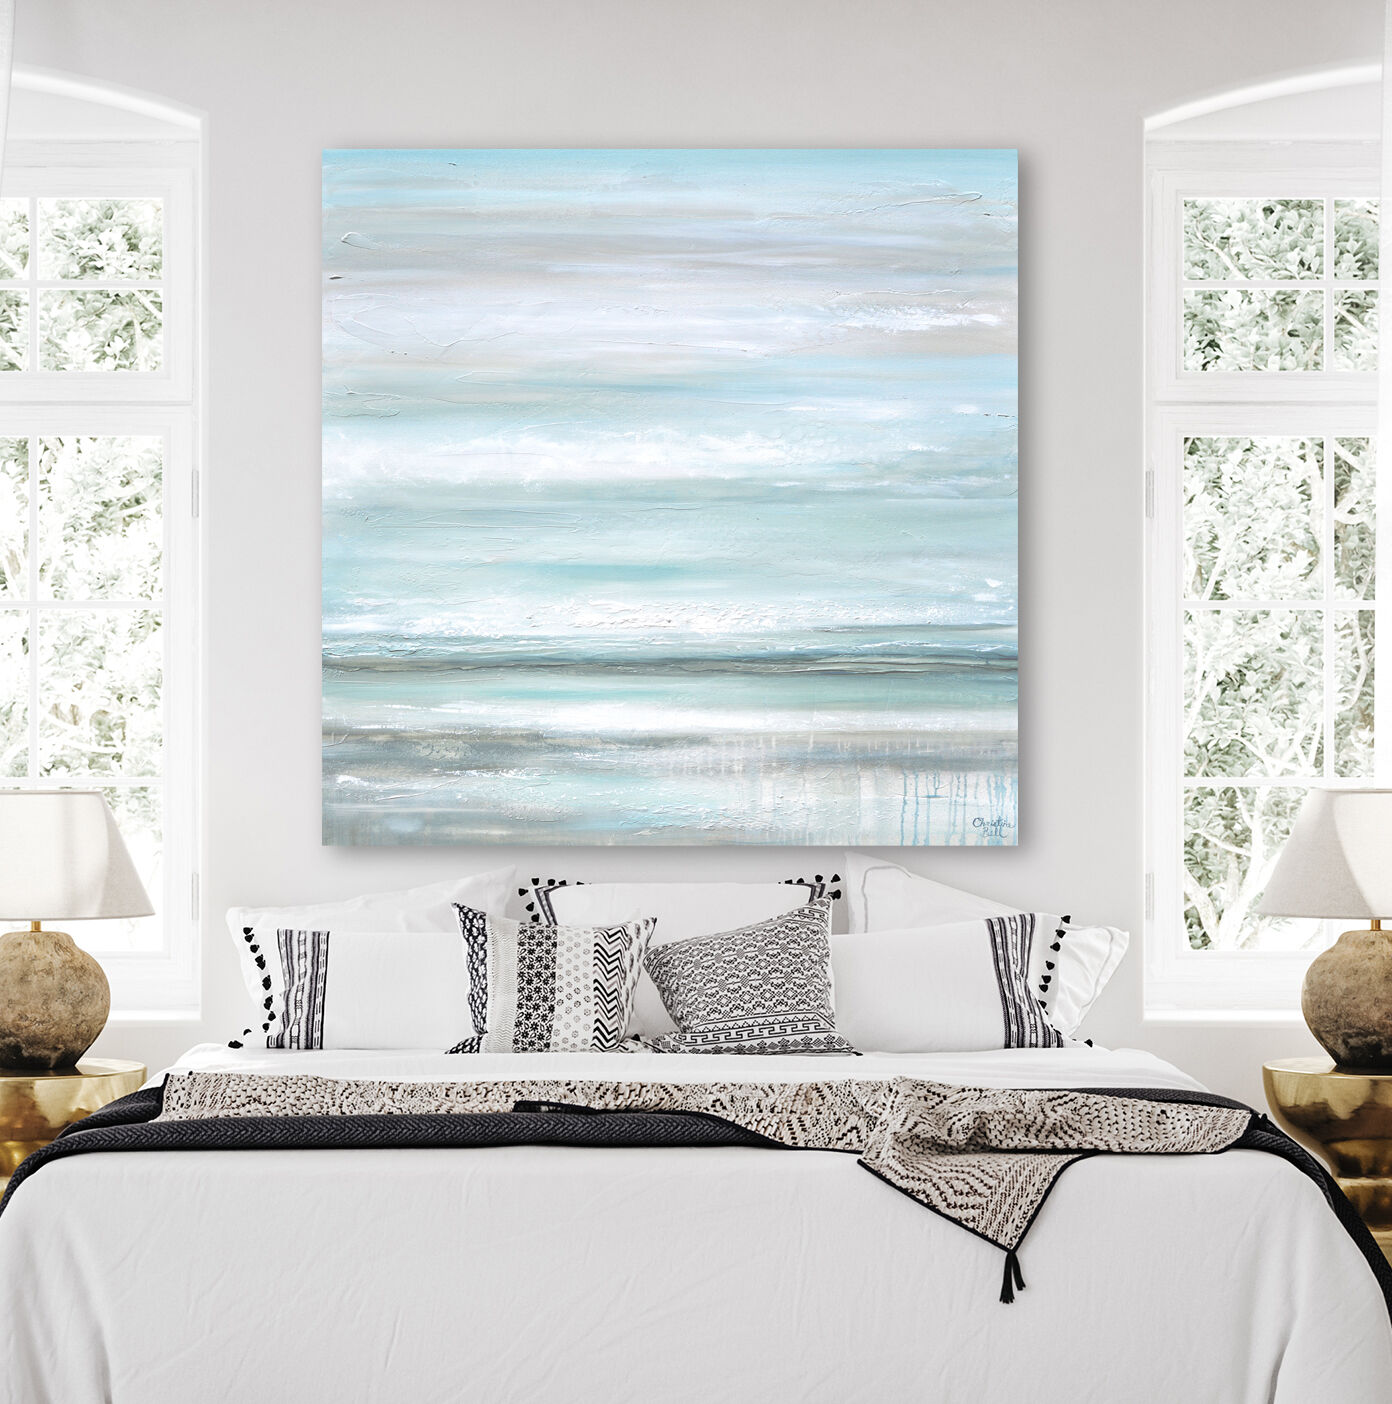 "Euphoria" GICLEE PRINT Coastal Abstract Painting, Seafoam Green Light Blue, Grey, White - 16x16" / Gicle Stretched Canvas Print